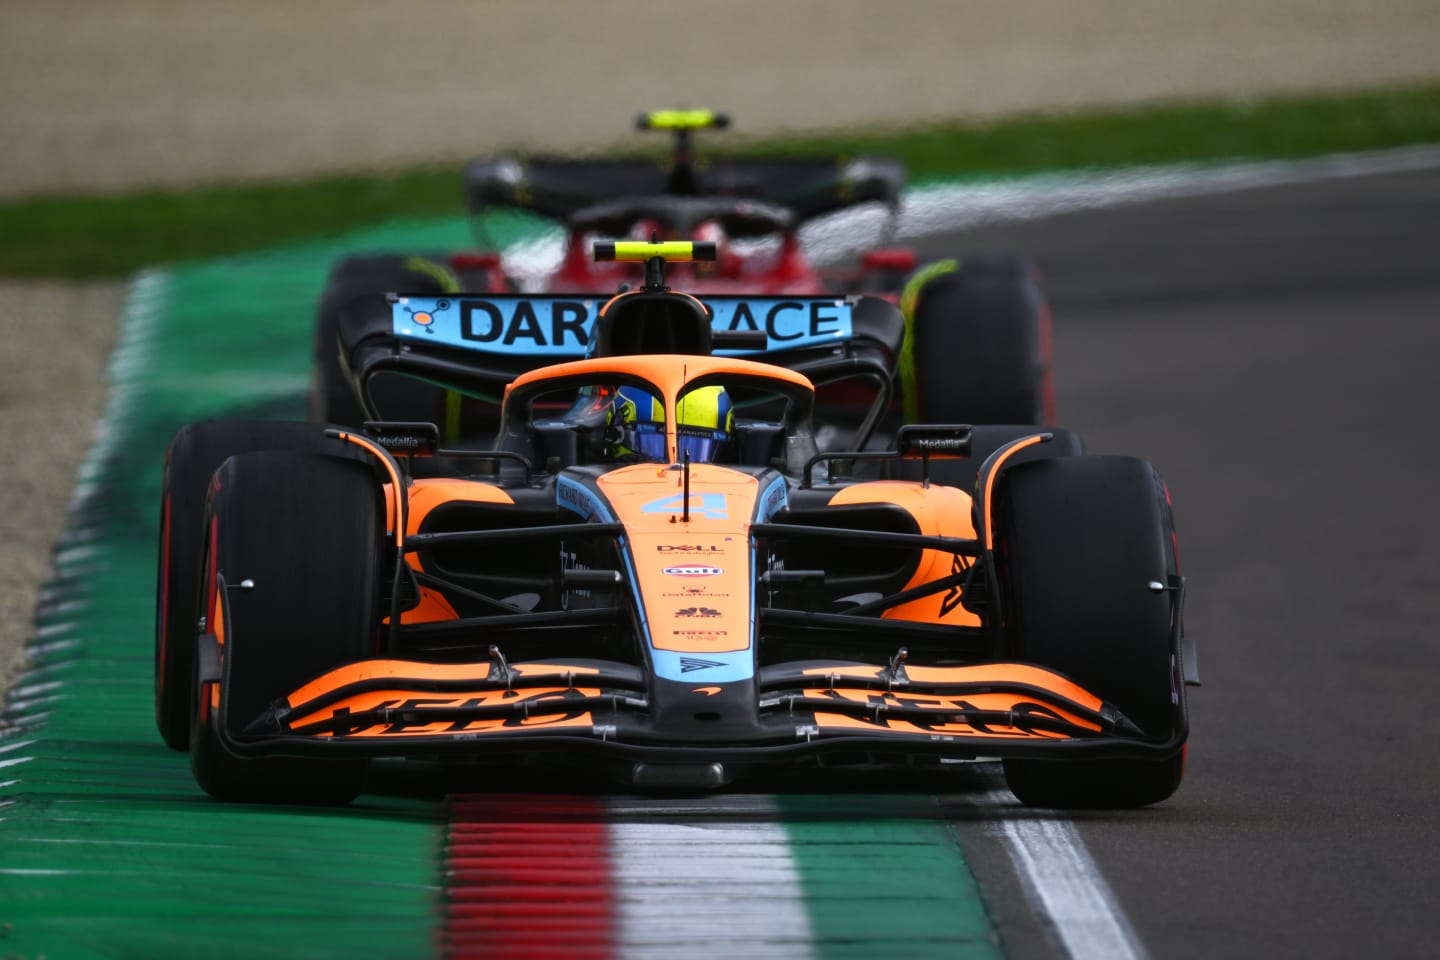 IMOLA, ITALY - APRIL 23: Lando Norris of Great Britain driving the (4) McLaren MCL36 Mercedes leads Carlos Sainz of Spain driving (55) the Ferrari F1-75 during Sprint ahead of the F1 Grand Prix of Emilia Romagna at Autodromo Enzo e Dino Ferrari on April 23, 2022 in Imola, Italy. (Photo by Clive Mason/Getty Images)